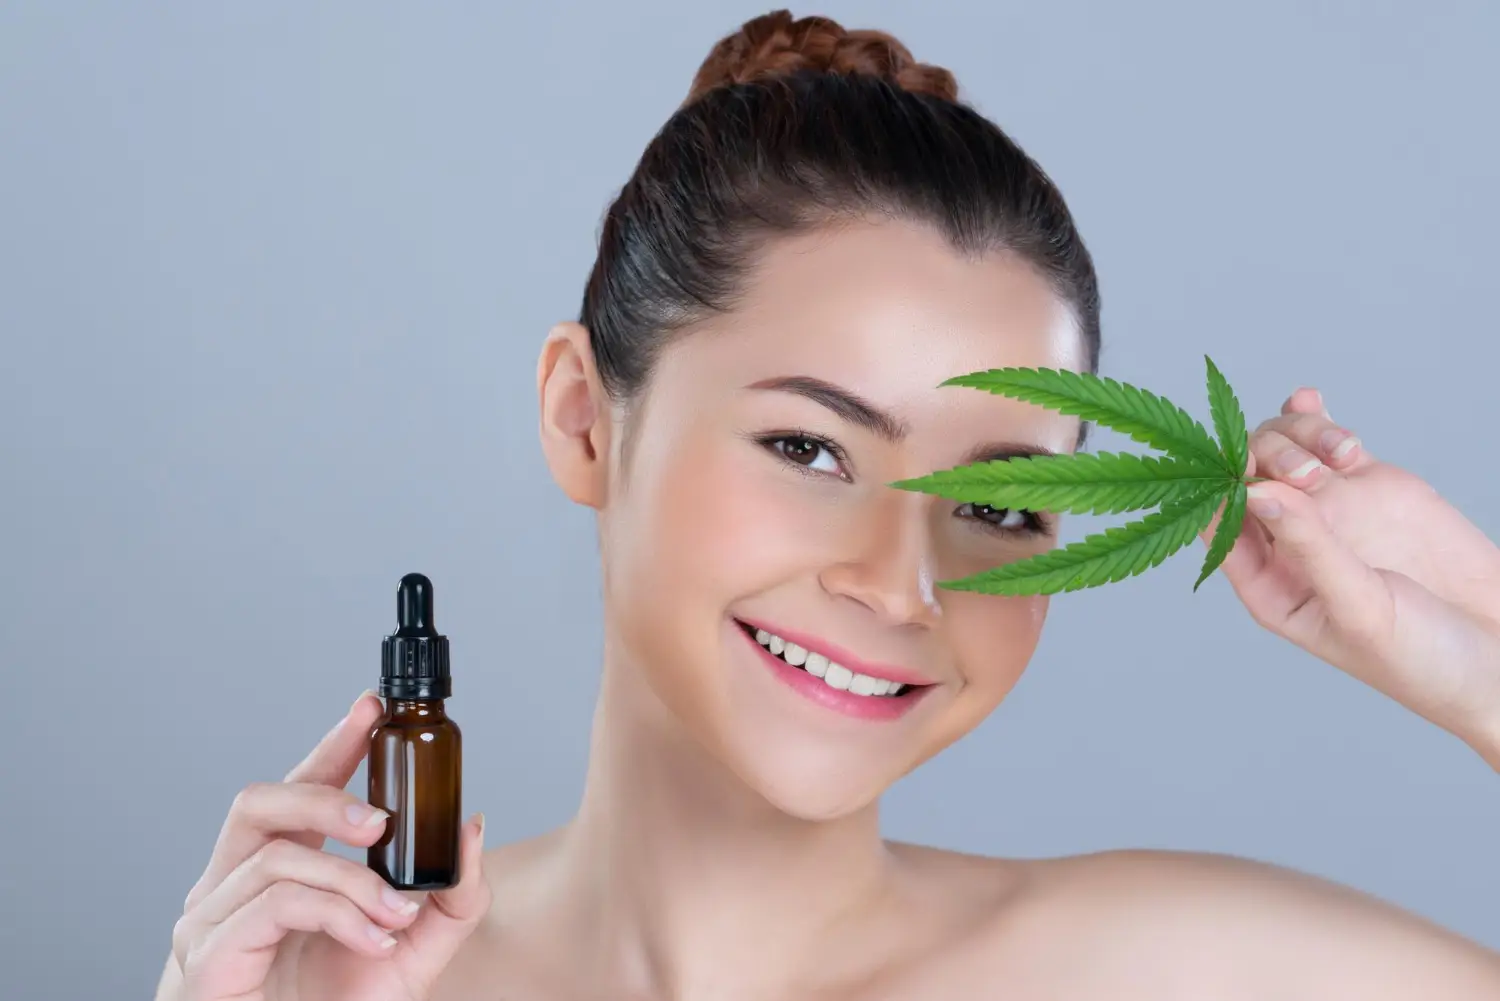 Discover The Therapeutic Benefits Of Kush Queen’s CBD Infused Products